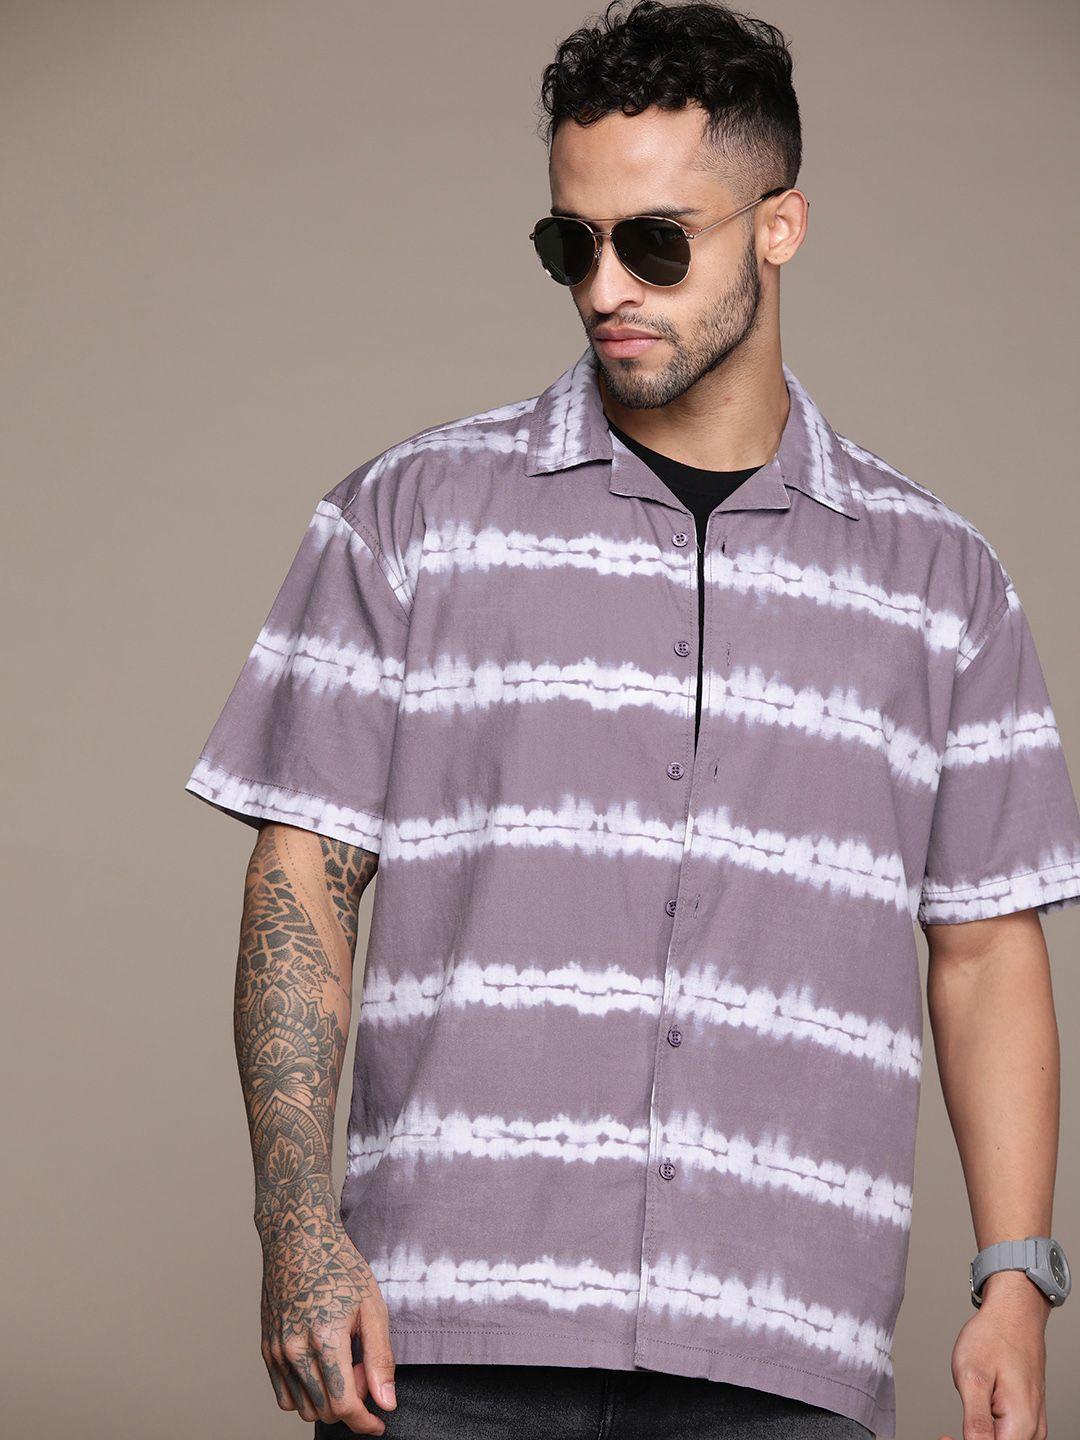 the roadster lifestyle co. tie & dye pure cotton relaxed fit shirt